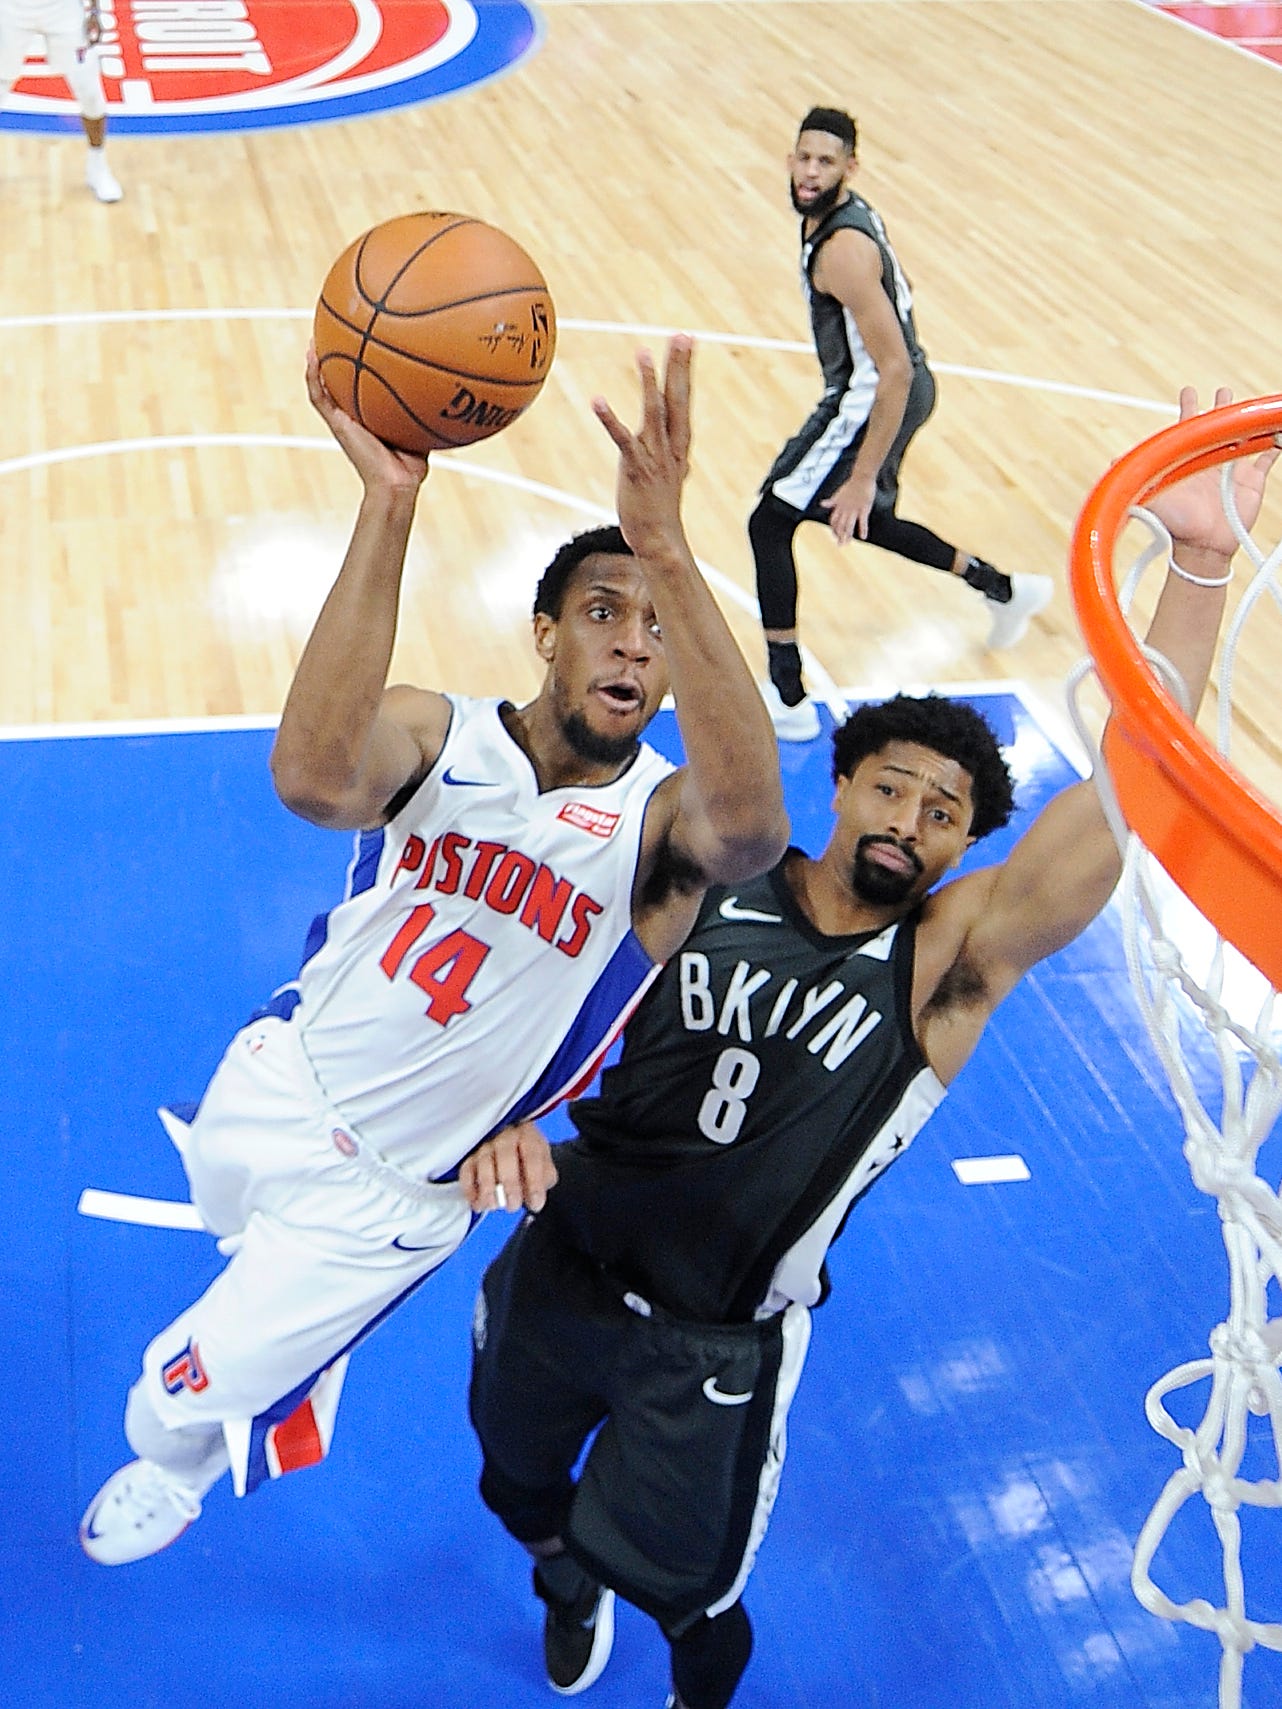 Pistons' Ish Smith shoots over Nets' Spencer Dinwiddie in the second quarter. The Pistons defeated the Nets 115-106, Wednesday, February 7, 2018 at Little Caesars Arena in Detroit, Michigan.